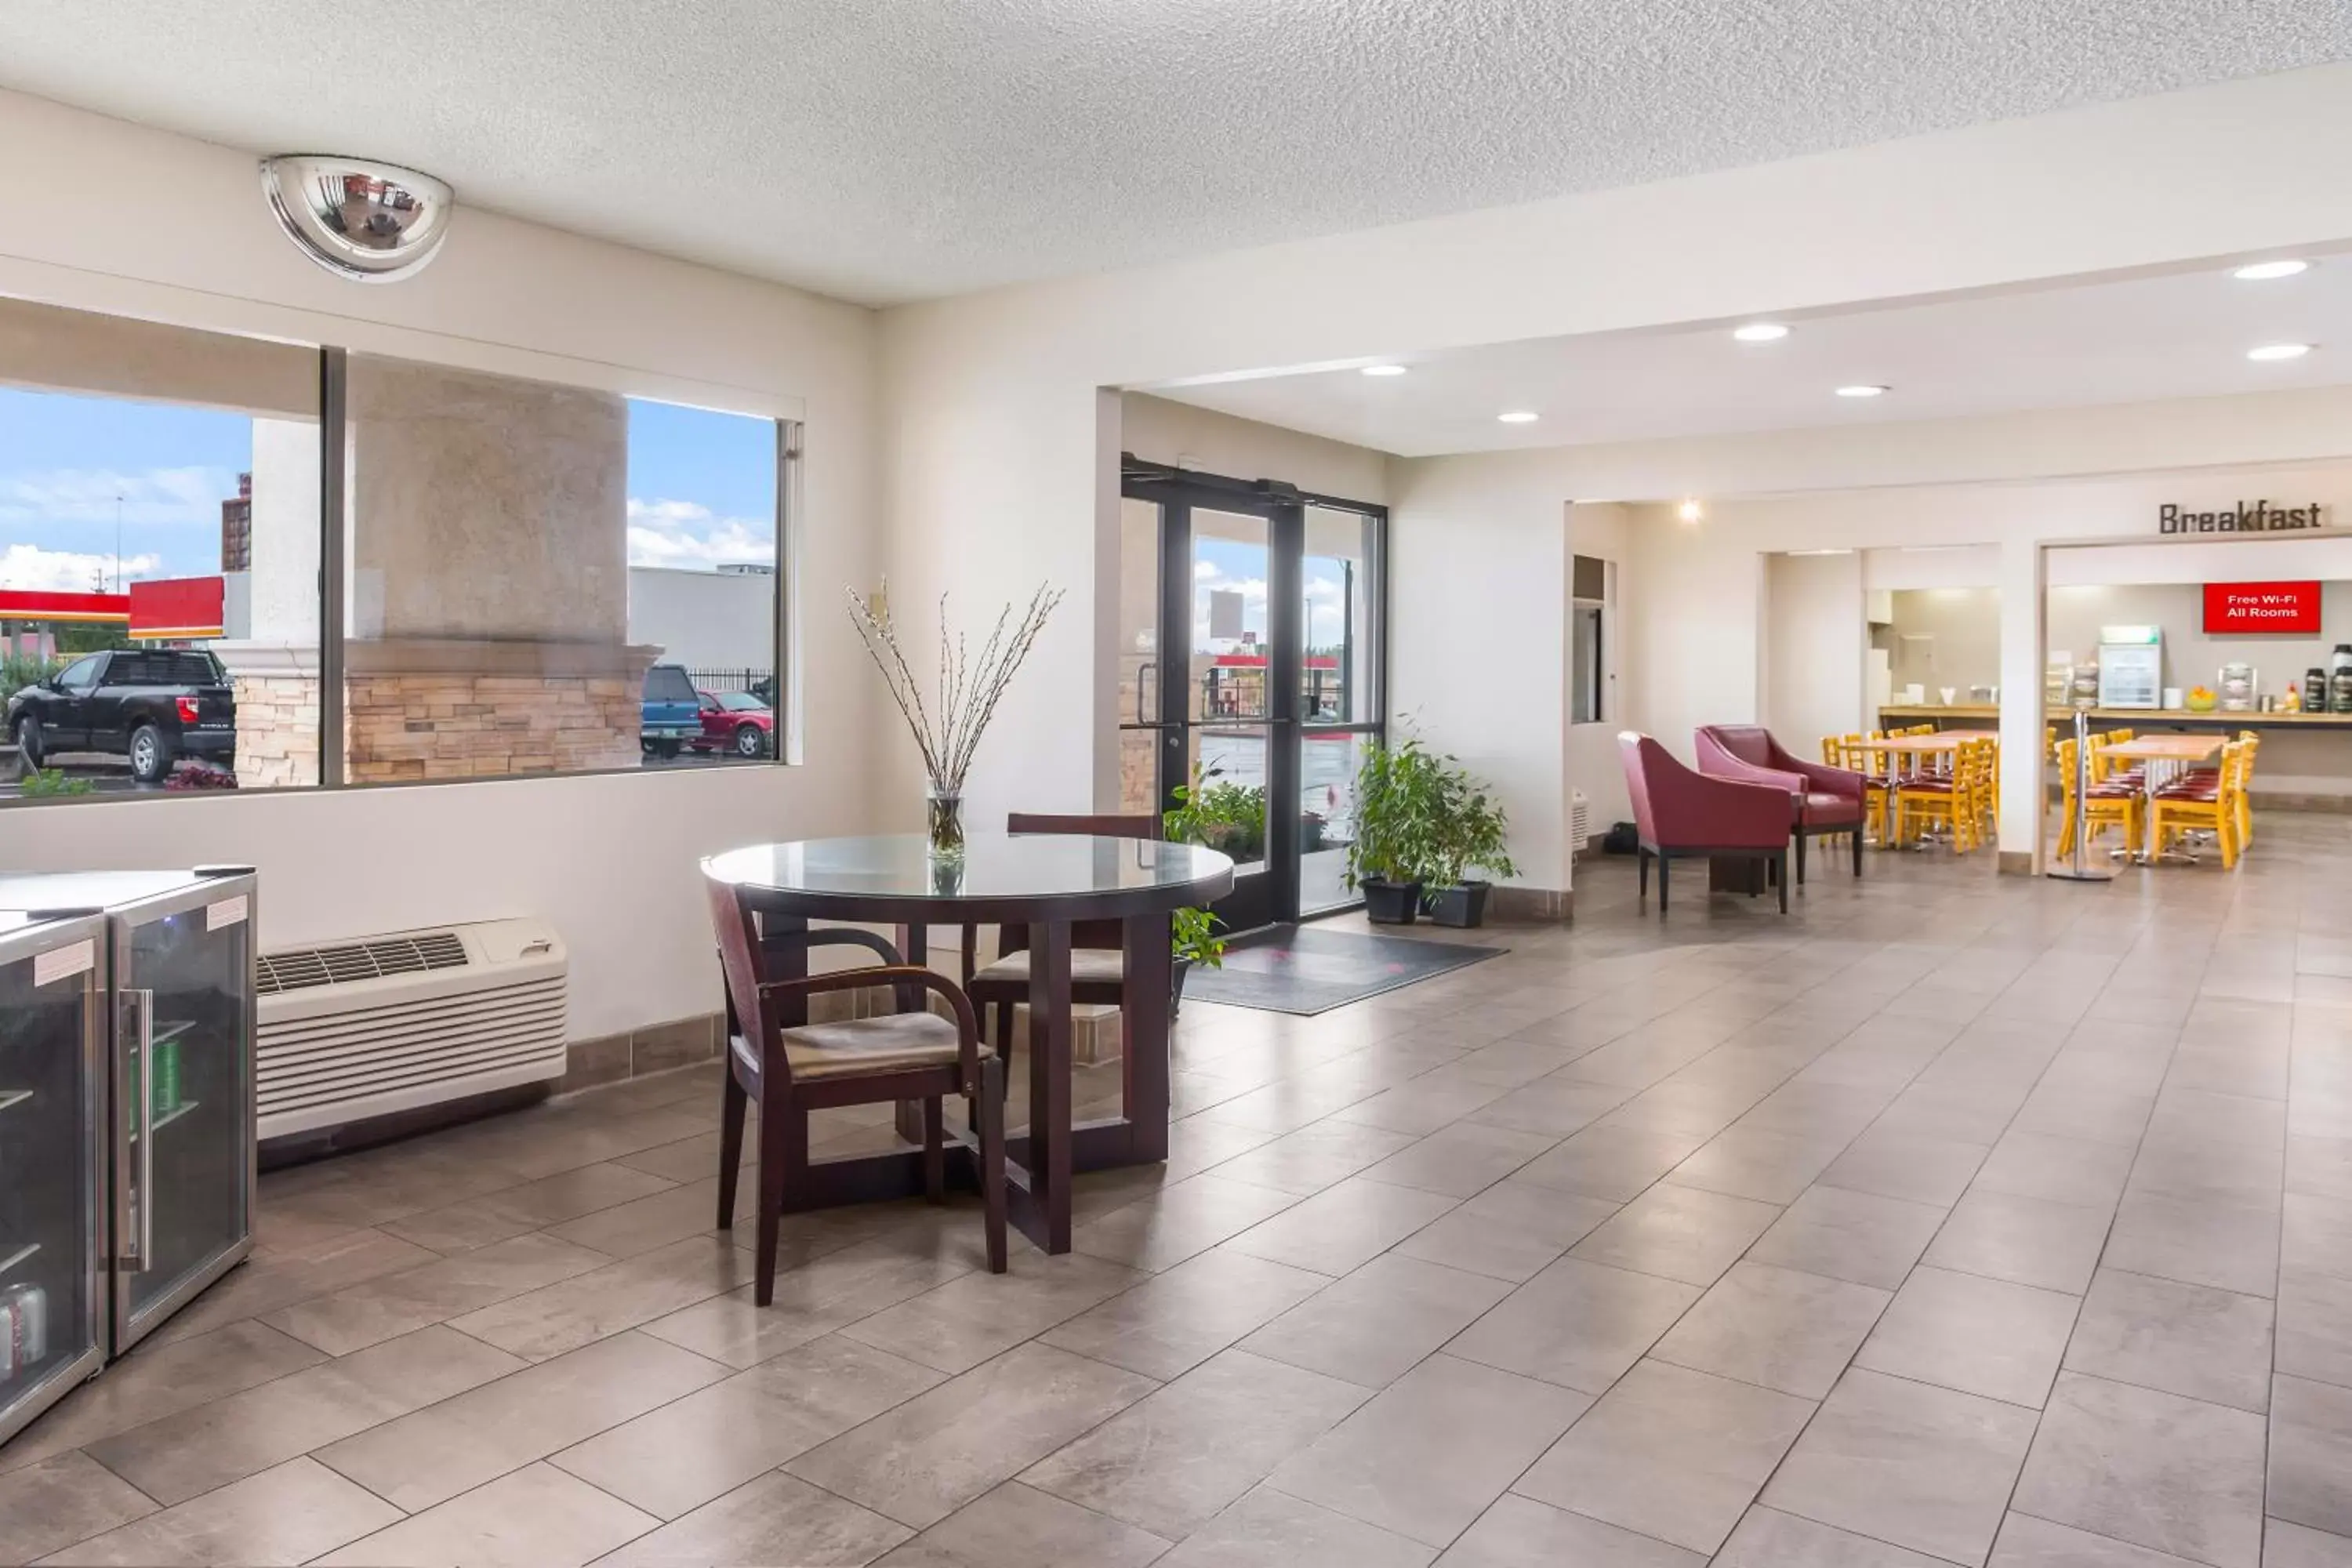 Lobby or reception in Red Roof Inn Albuquerque - Midtown